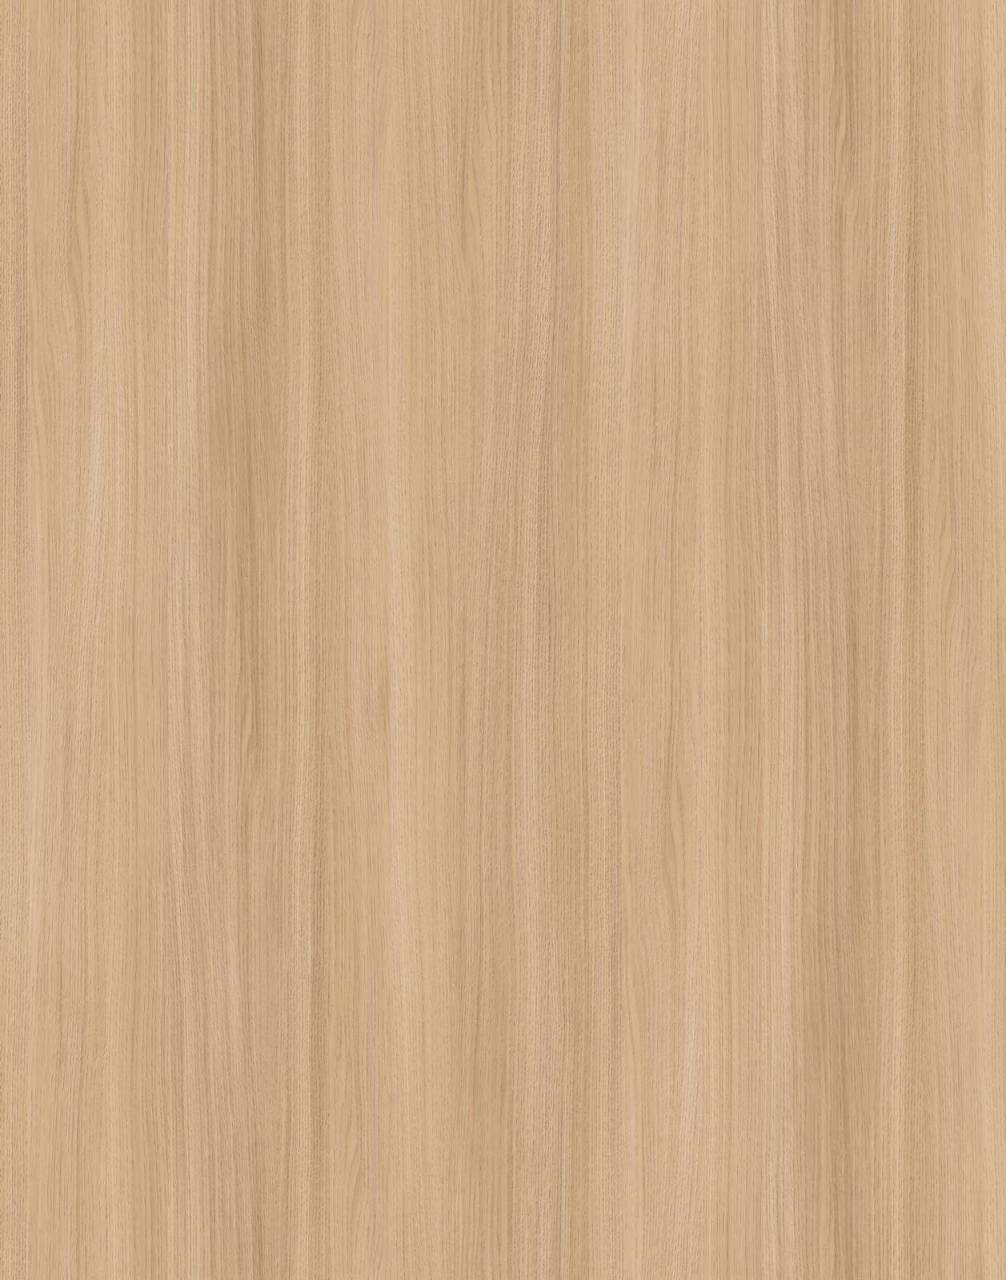 Close-up of K543 Sand Barbera Oak sample, featuring sandy beige color and textured surface.